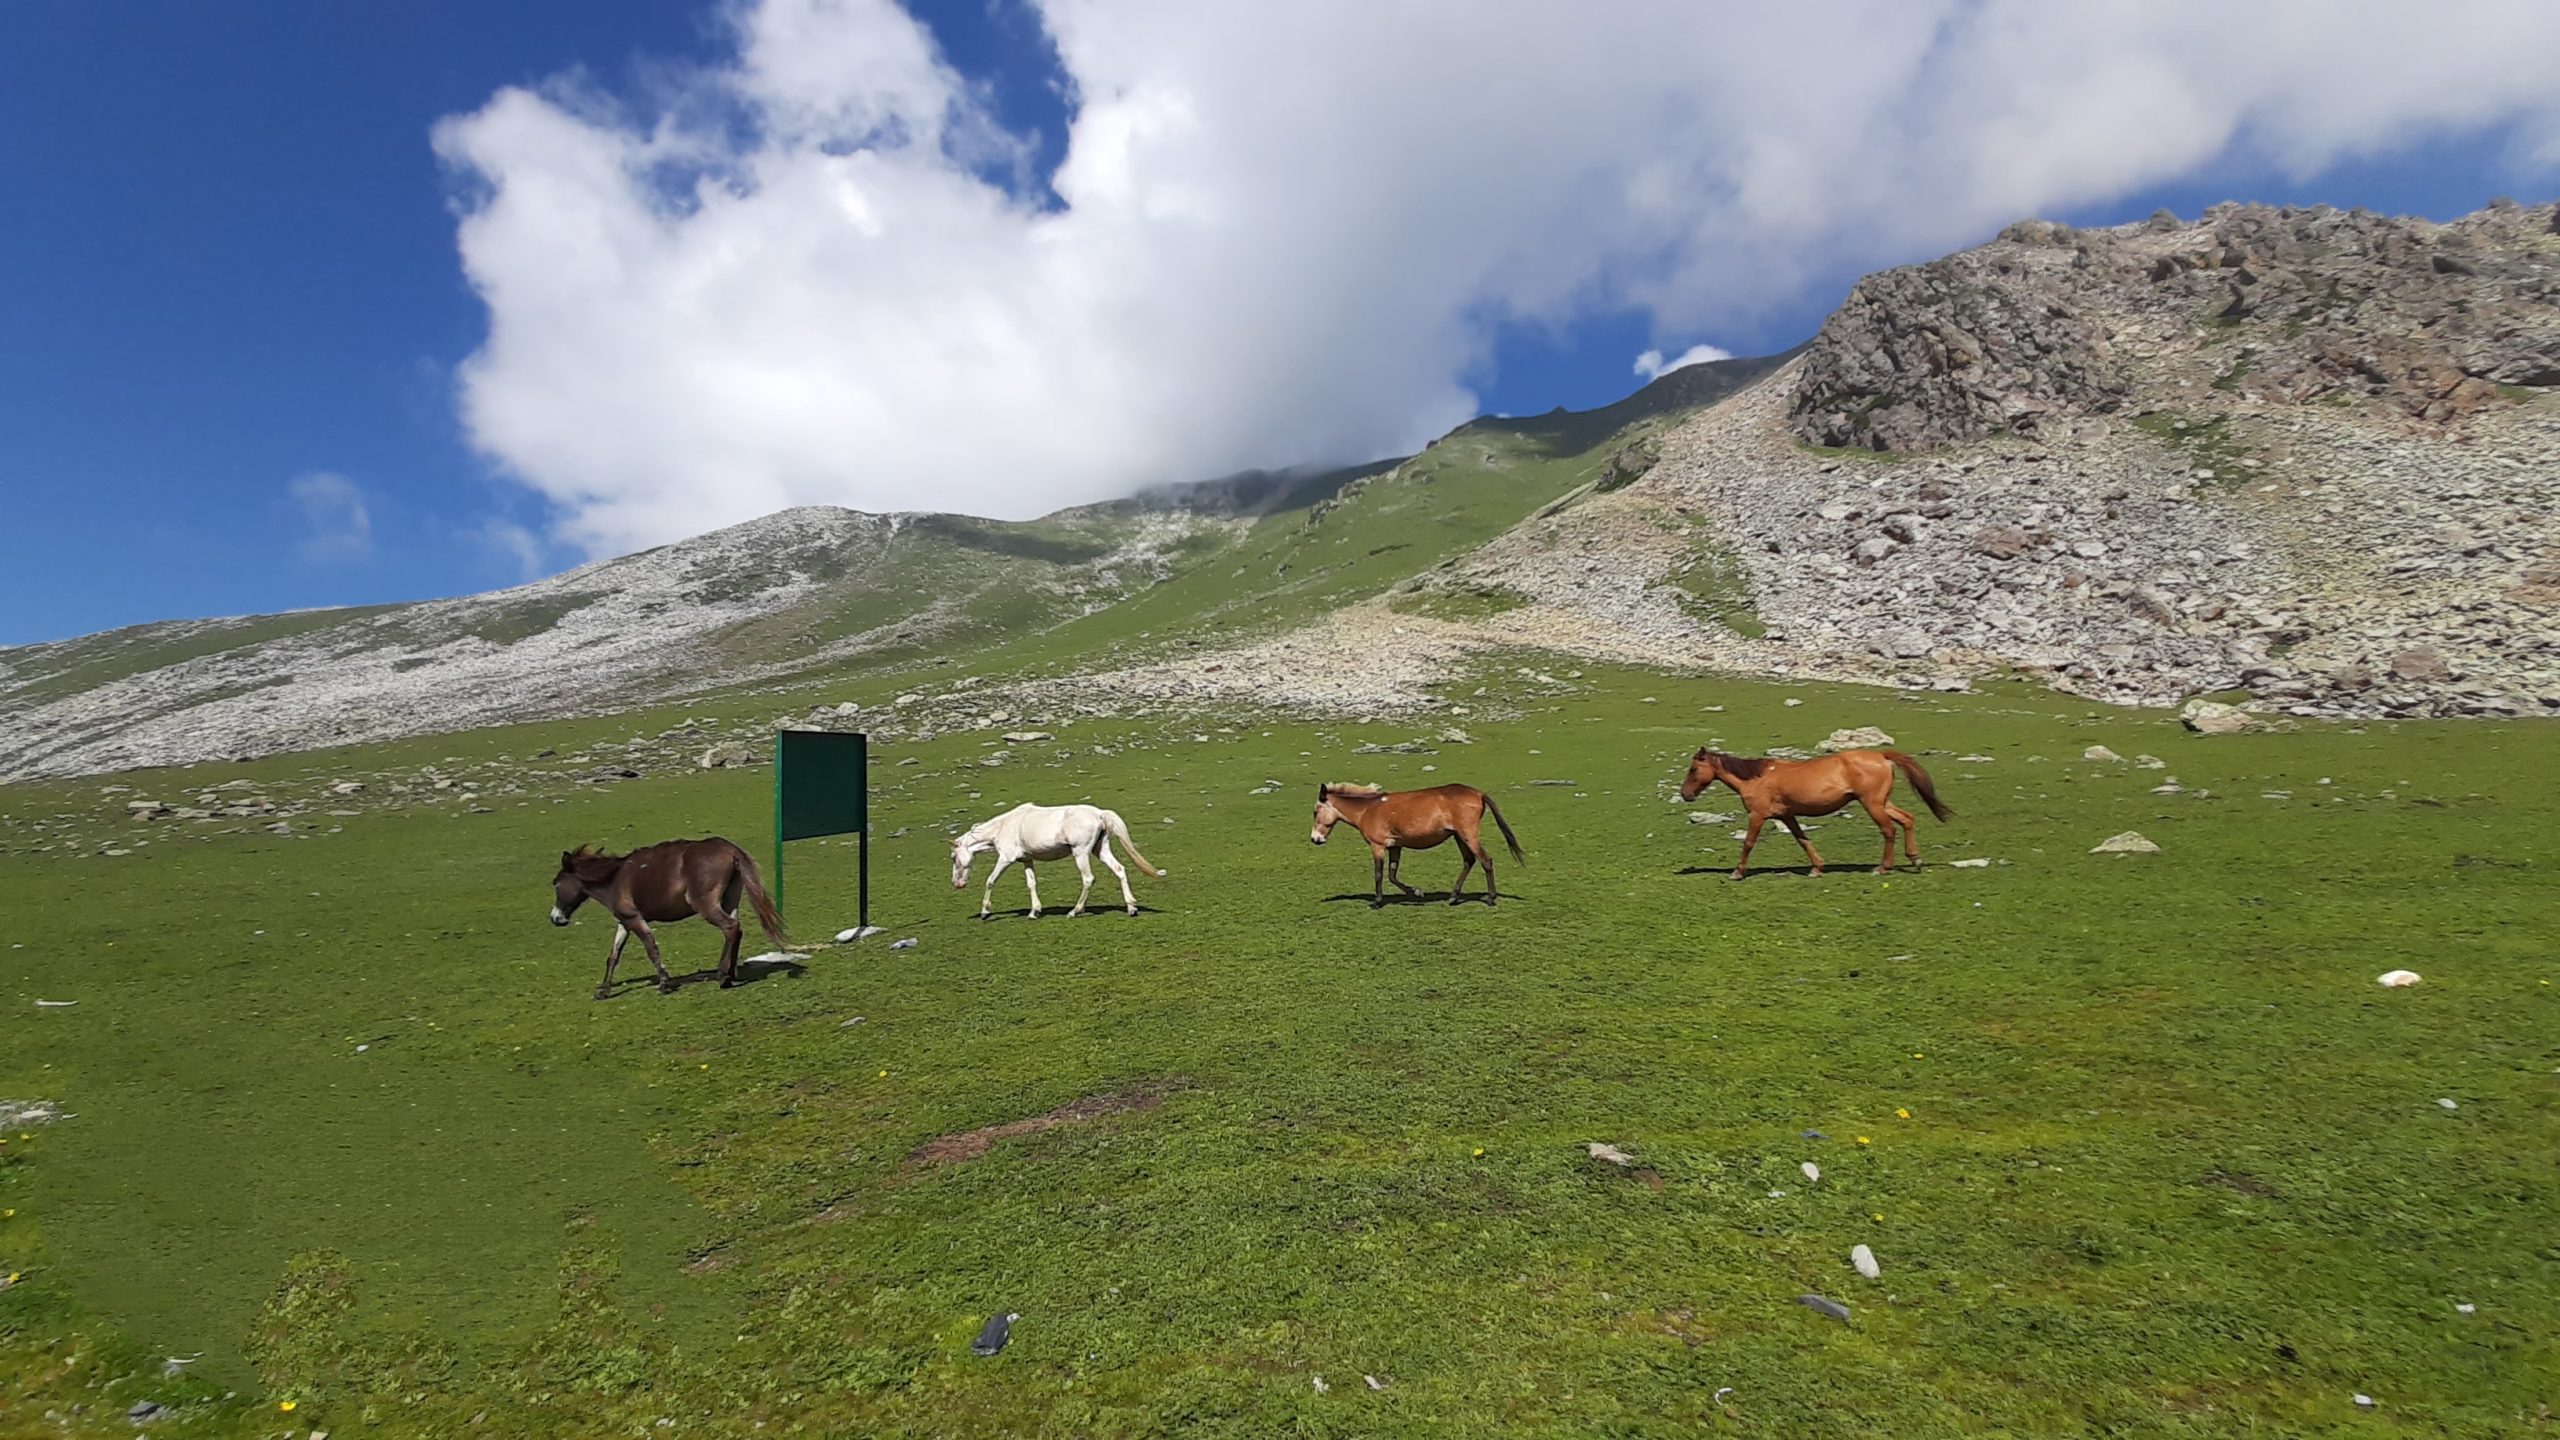 Horses grazing in a valley